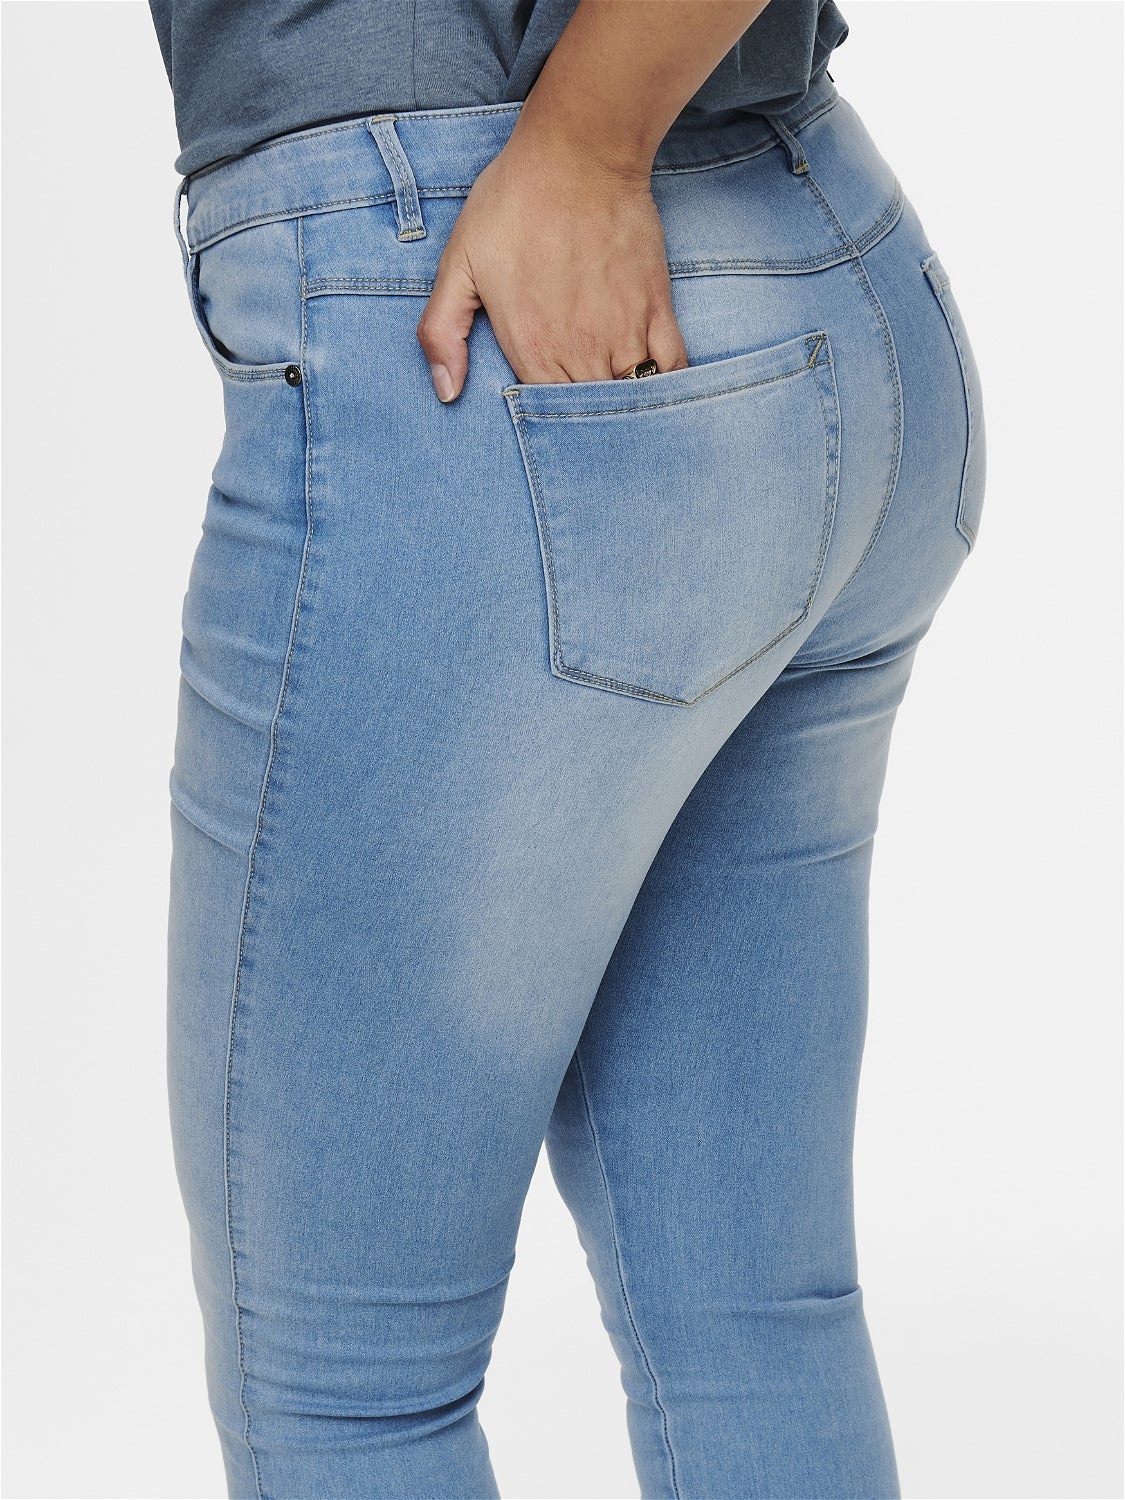 Curvy CarAugusta hw jeans fit | | ONLY® Light Blue Skinny